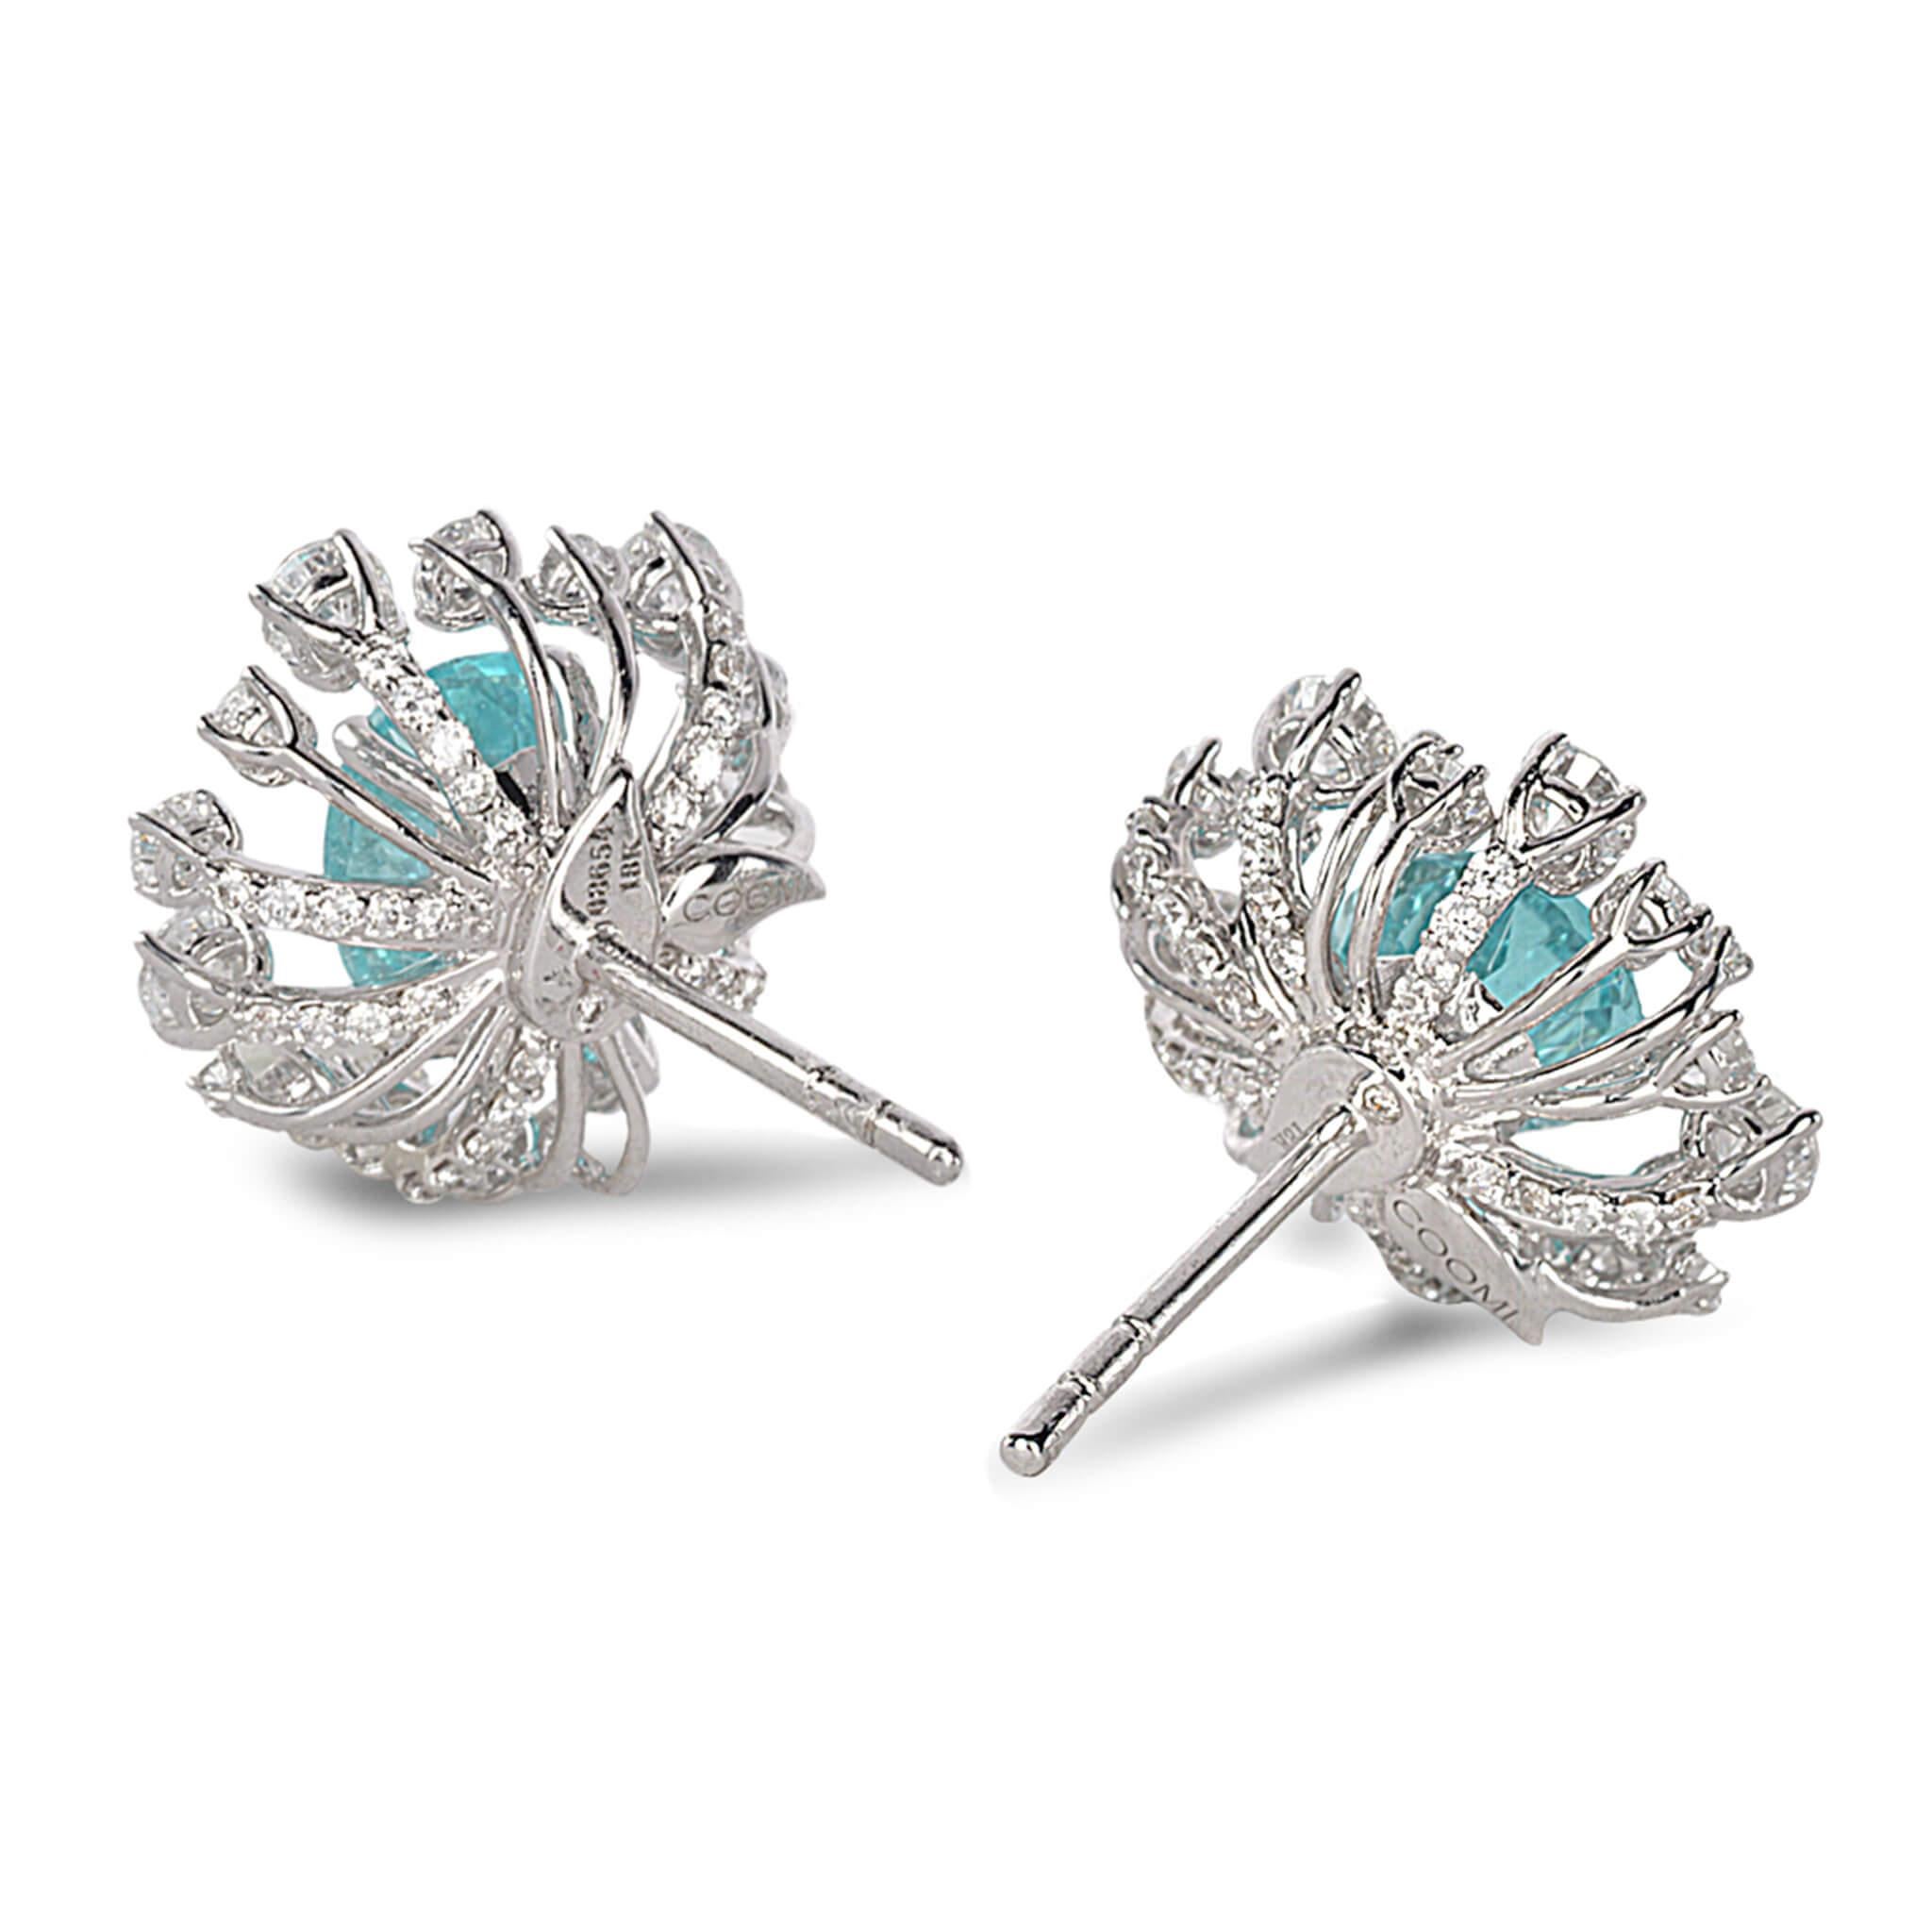 Trinity star burst stud earrings set in 18K white gold with 3.18cts paraiba tourmaline and 1.64cts diamond.
